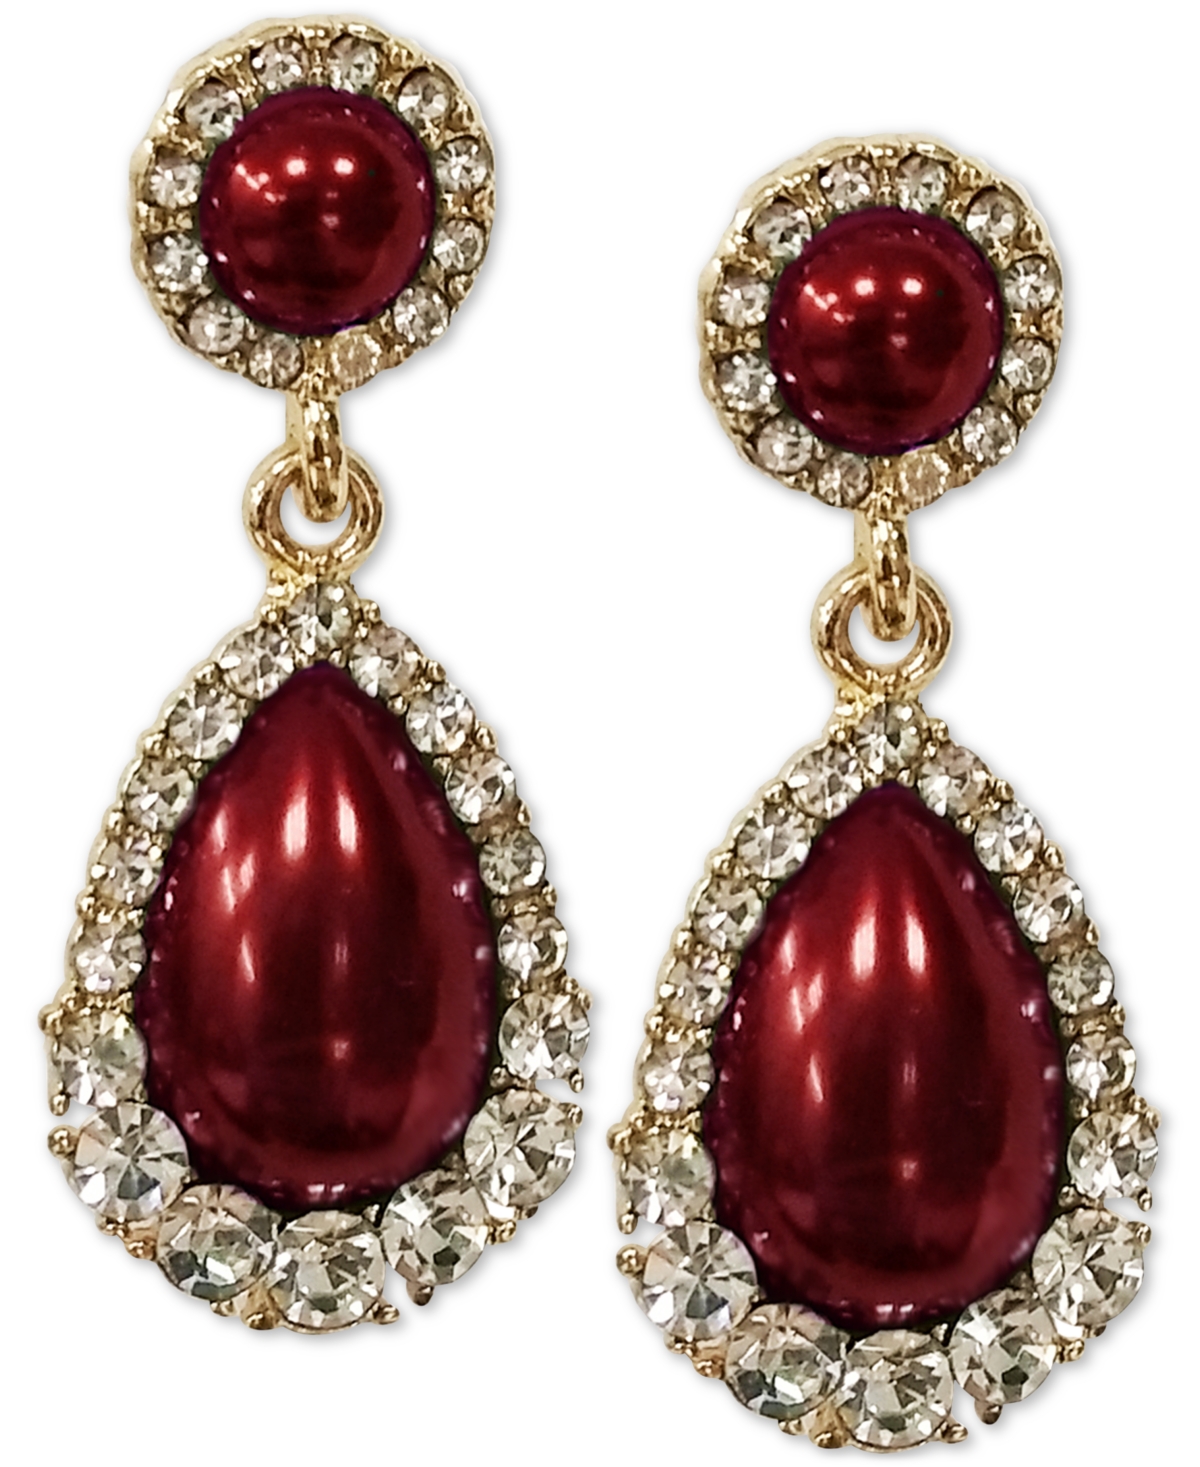 Gold-Tone Crystal & Imitation Pearl Drop Earrings, Created for Macy's - Red